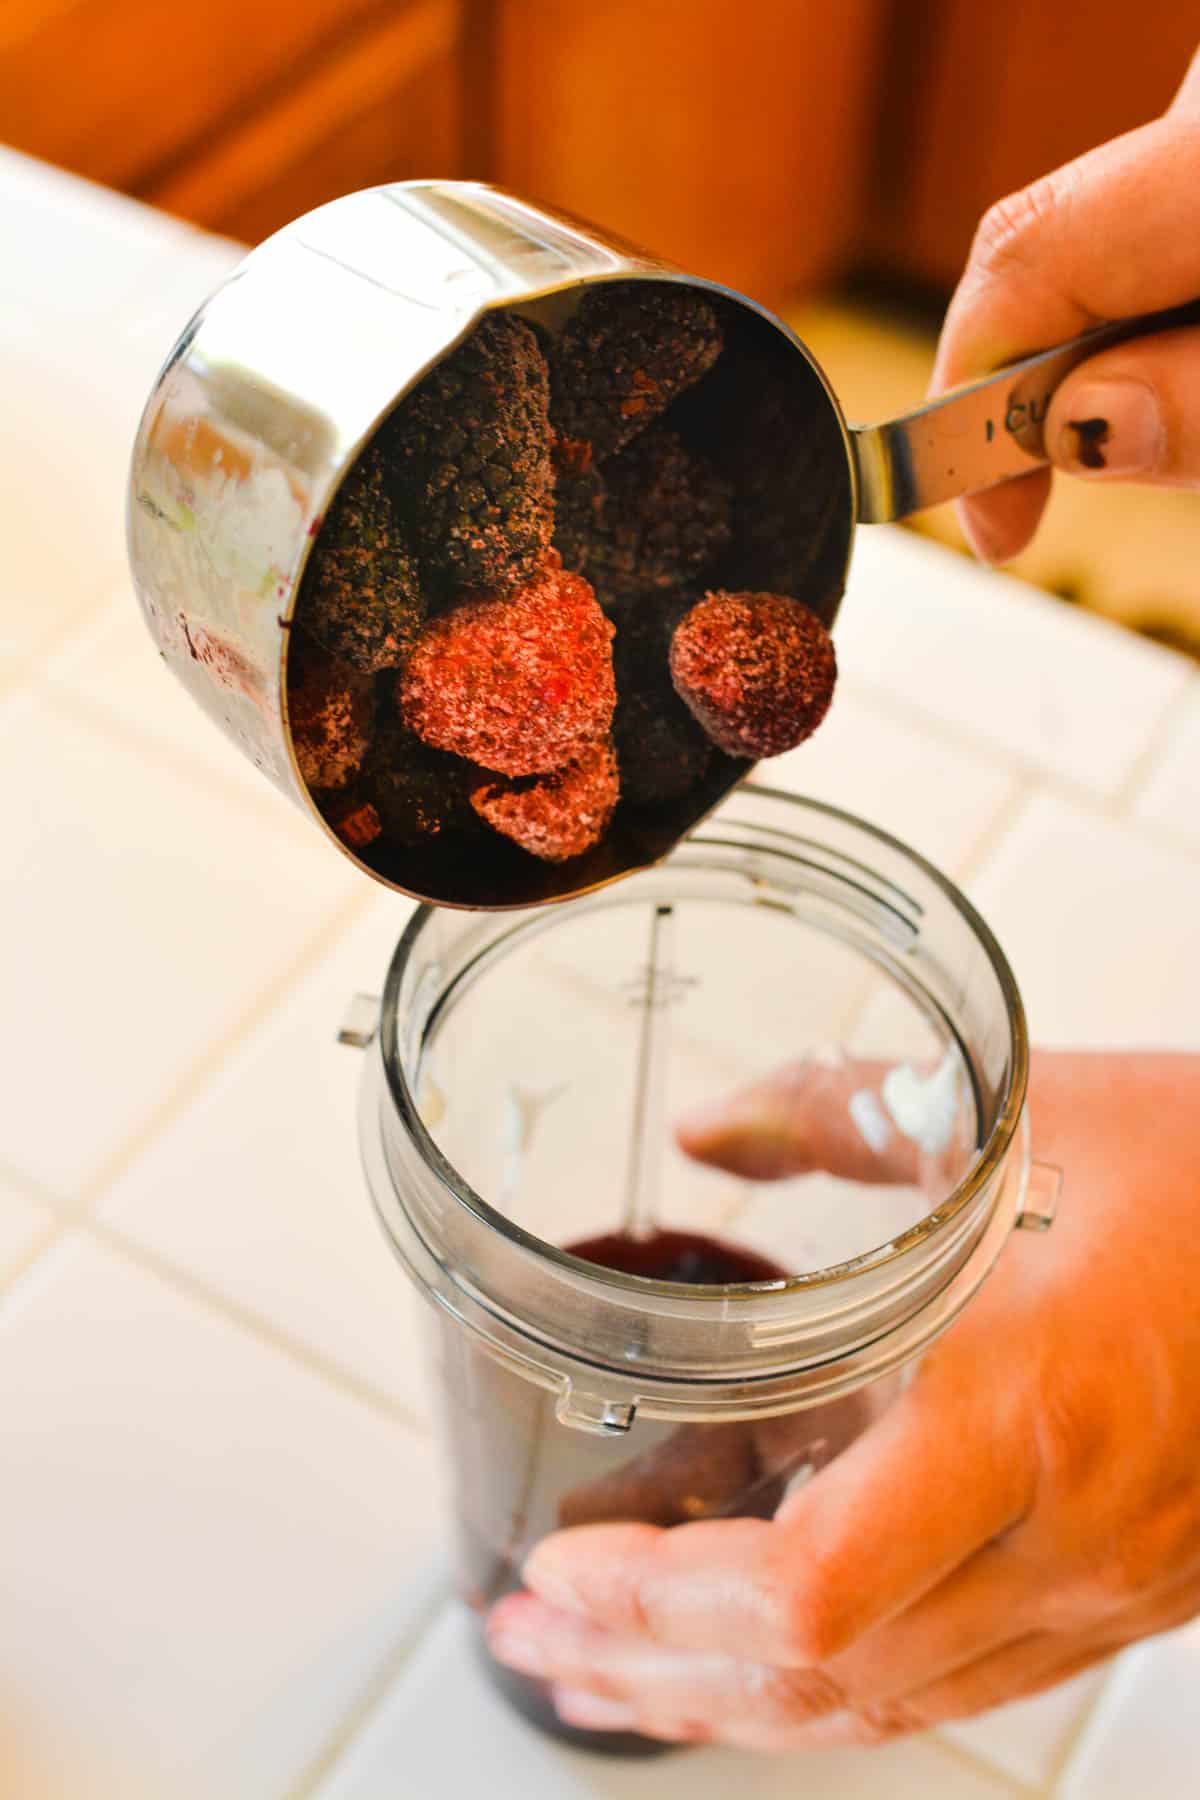 Woman adding frozen red berries to a blender jar for a smoothie.